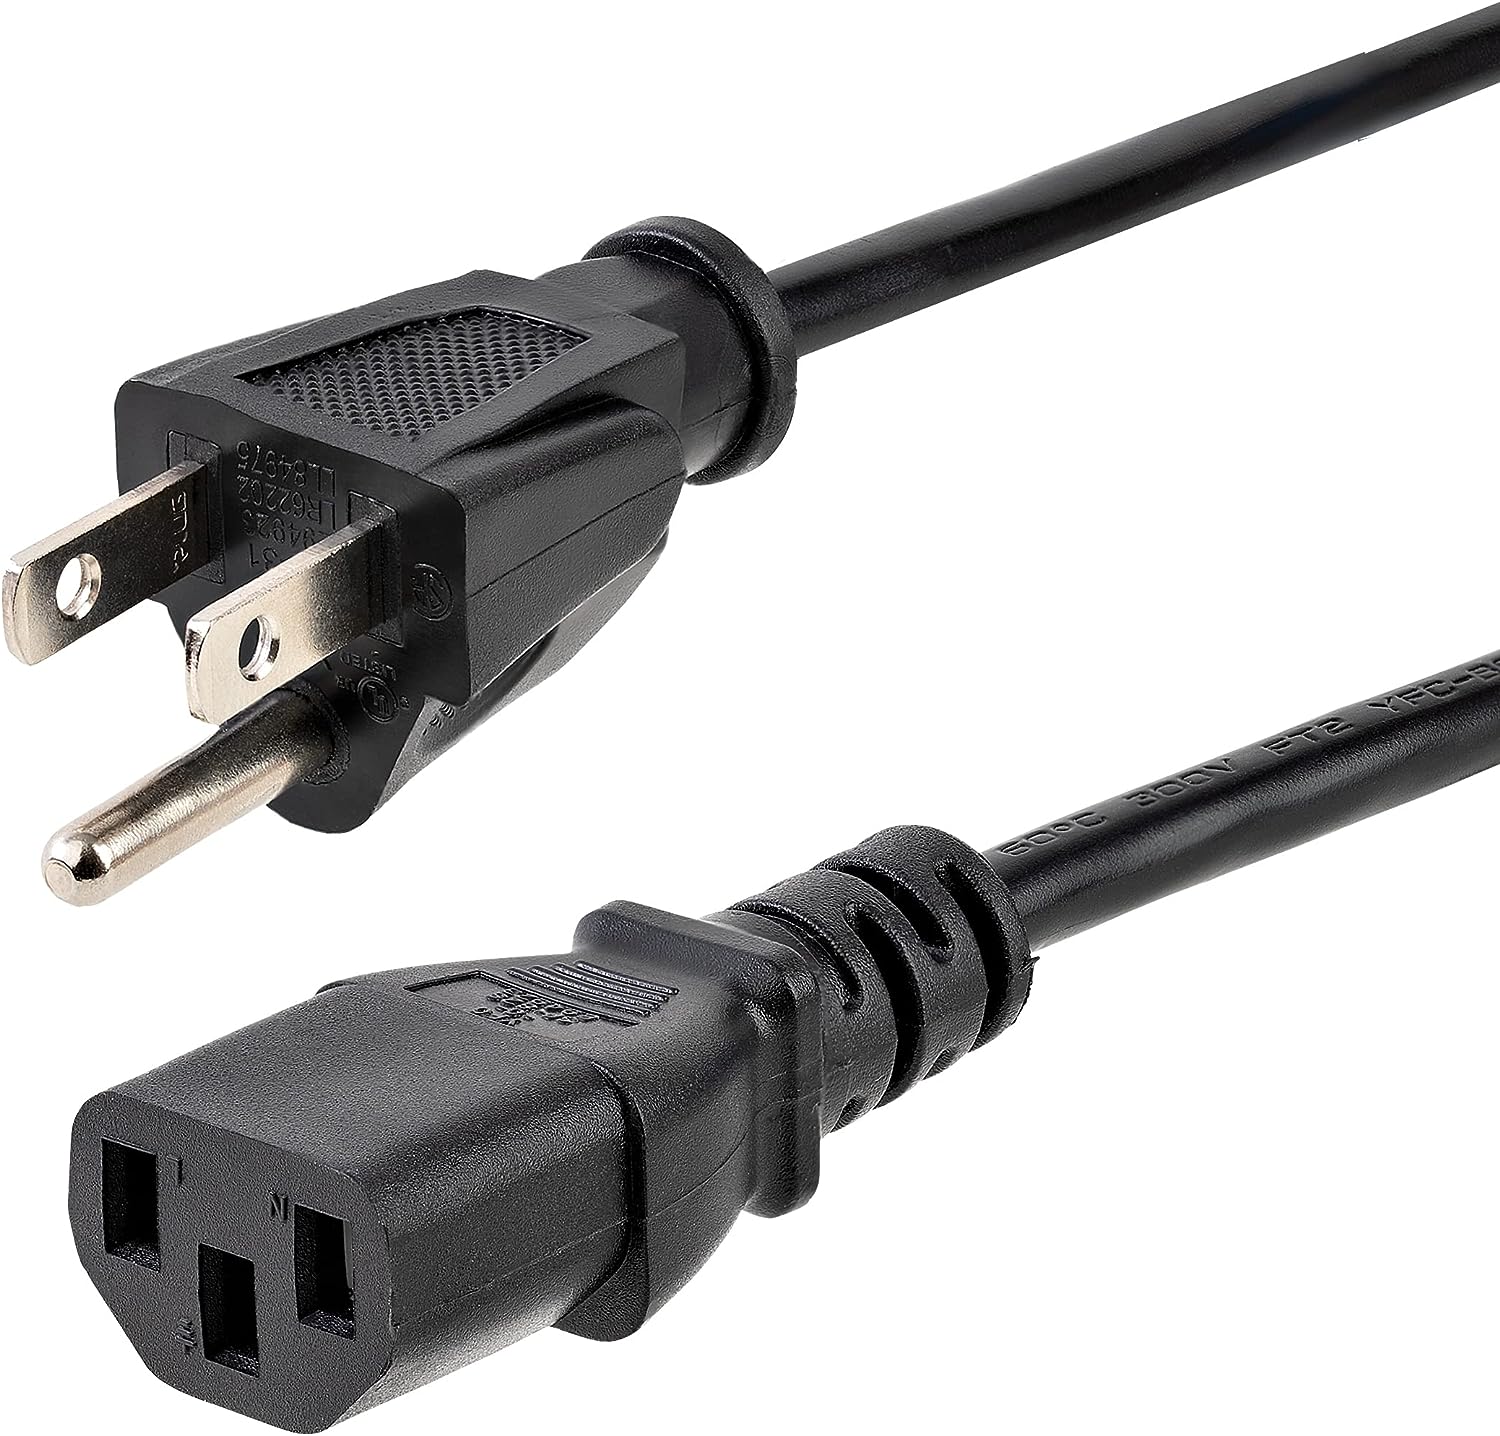 15 Best Monitor Power Cable for 2023